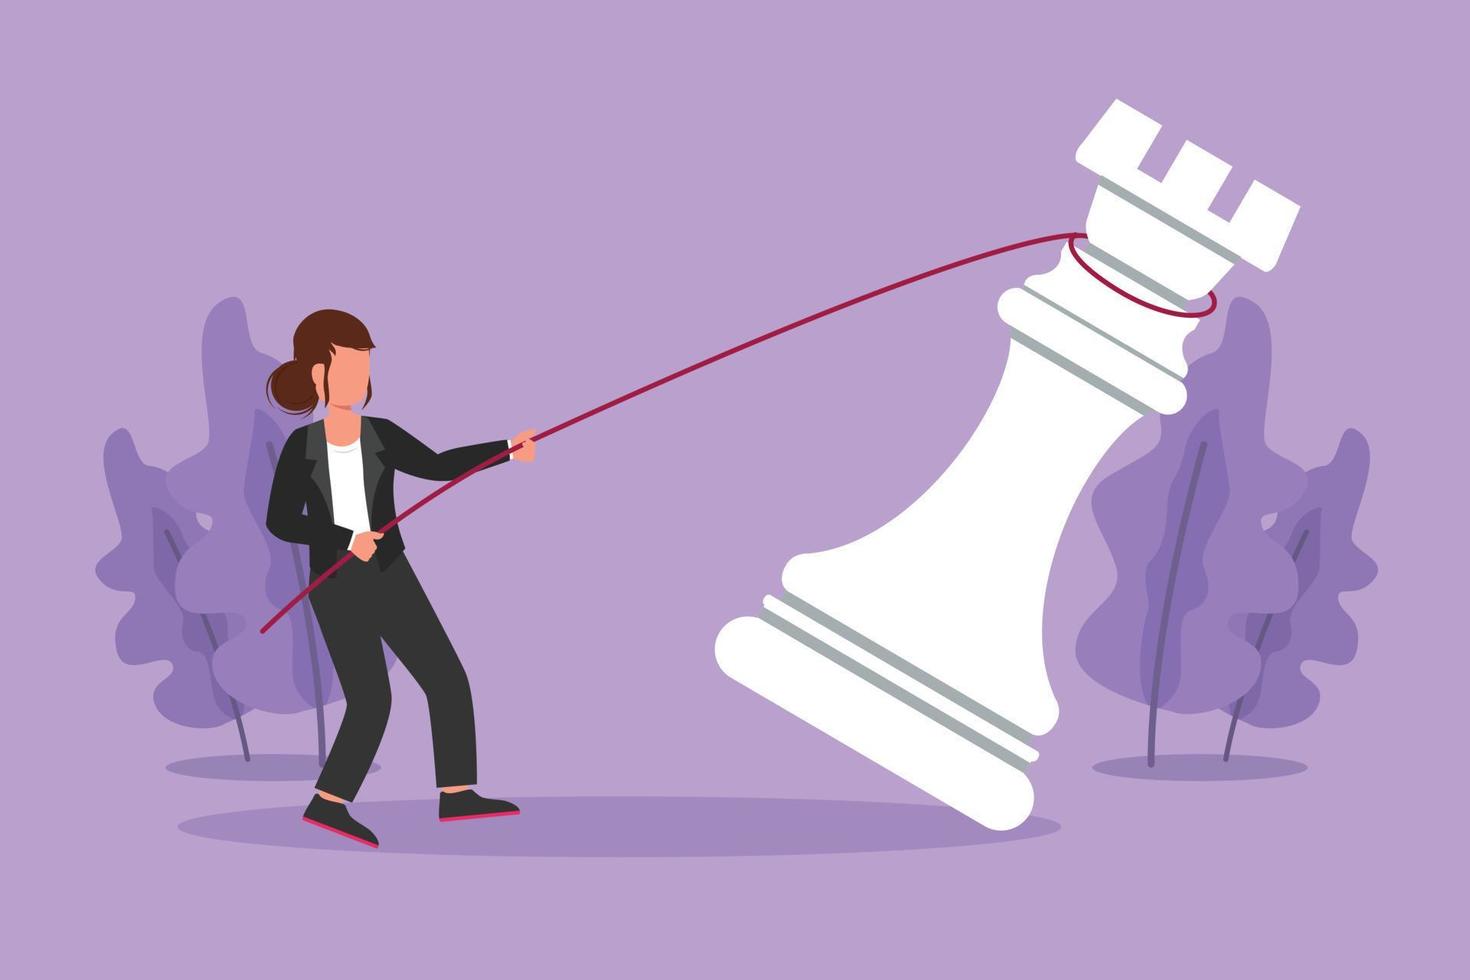 Cartoon flat style drawing attractive cute businesswoman pulling big rook chess with rope. Business achievement goal, idea, strategy, competitive, strategic concept. Graphic design vector illustration